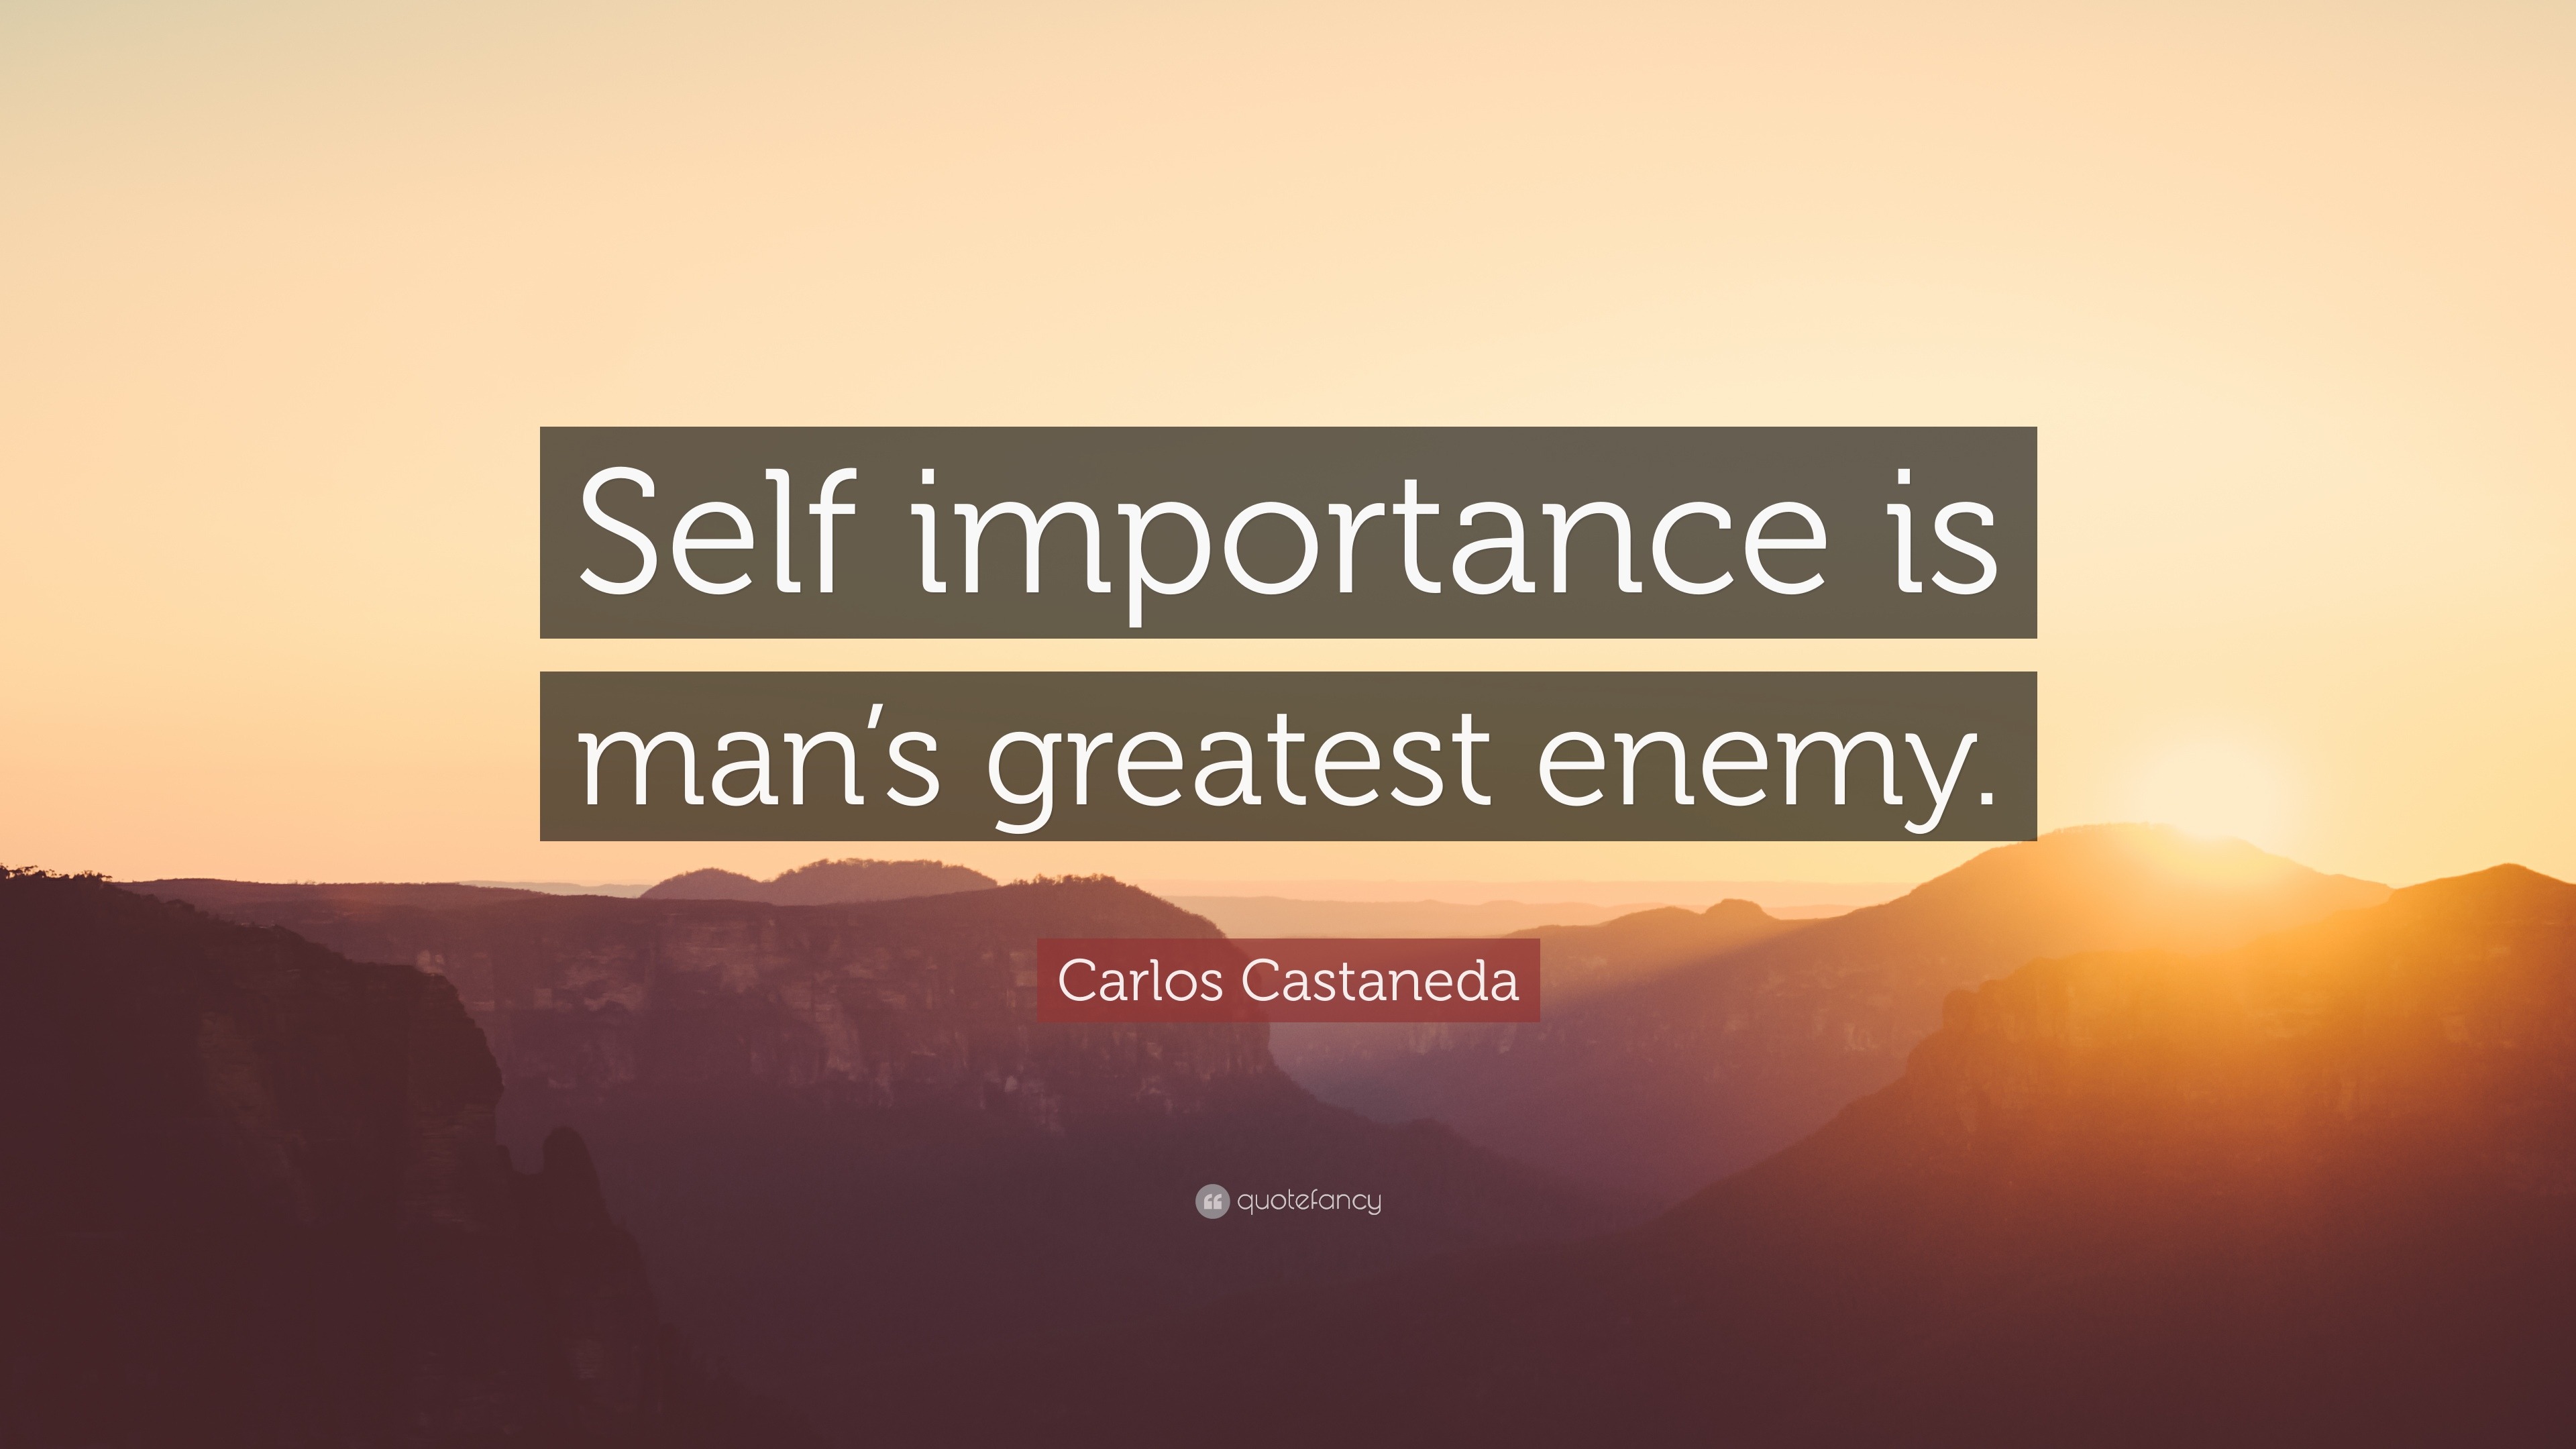 Carlos Castaneda Quote “Self importance is man’s greatest